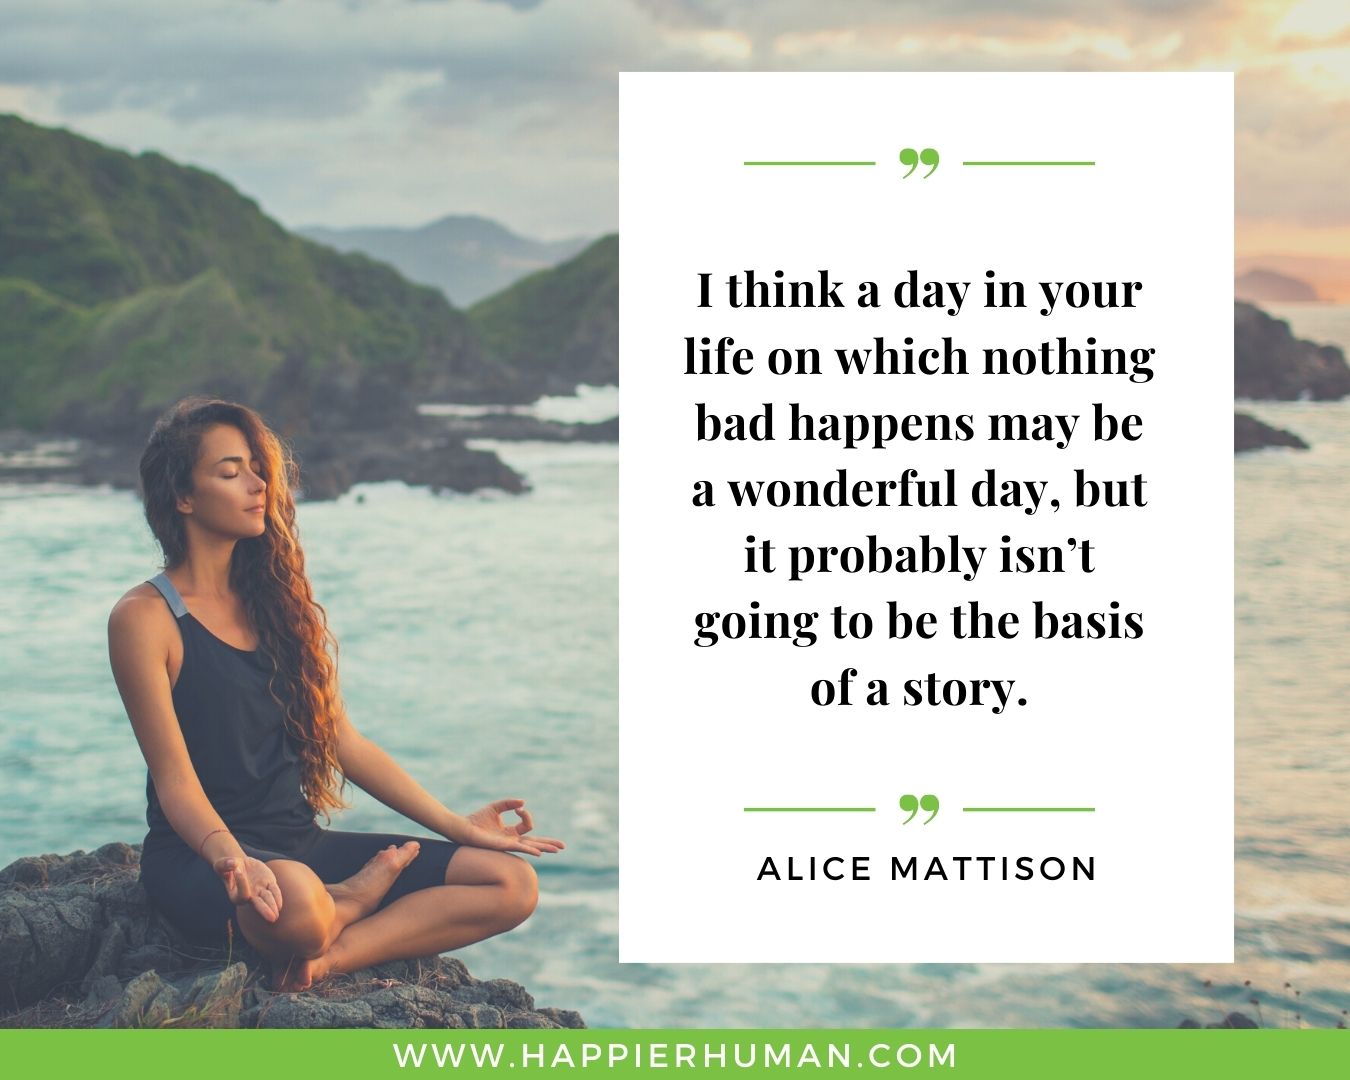 35 Inspirational Have a Great Day Quotes and Sayings - Happier Human